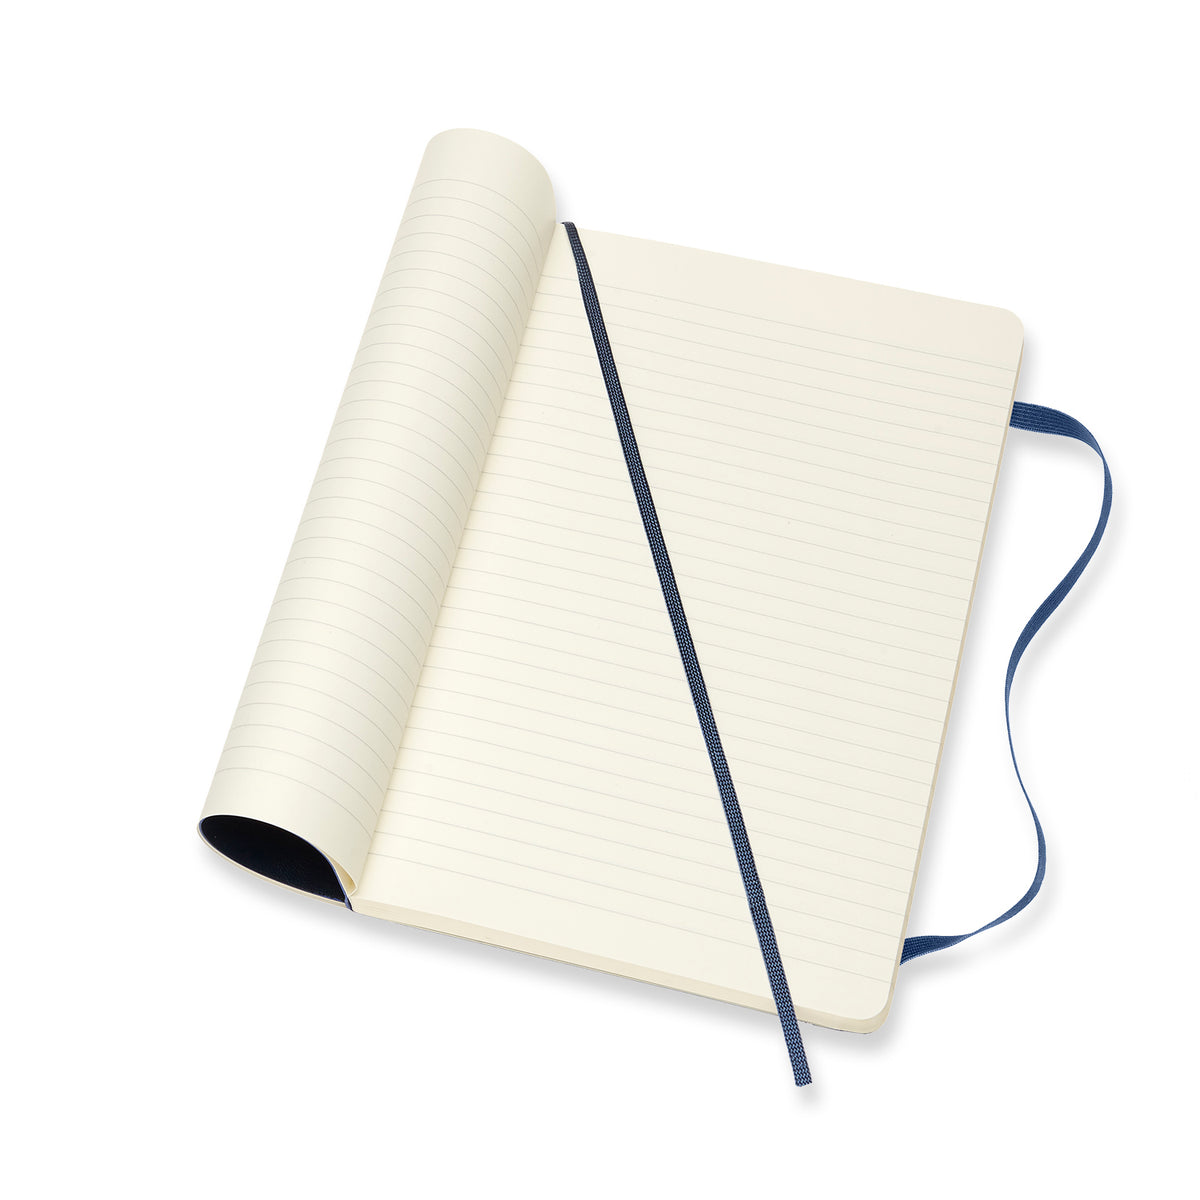 Moleskine - Classic Soft Cover Notebook - Ruled - Large - Sapphire Blue